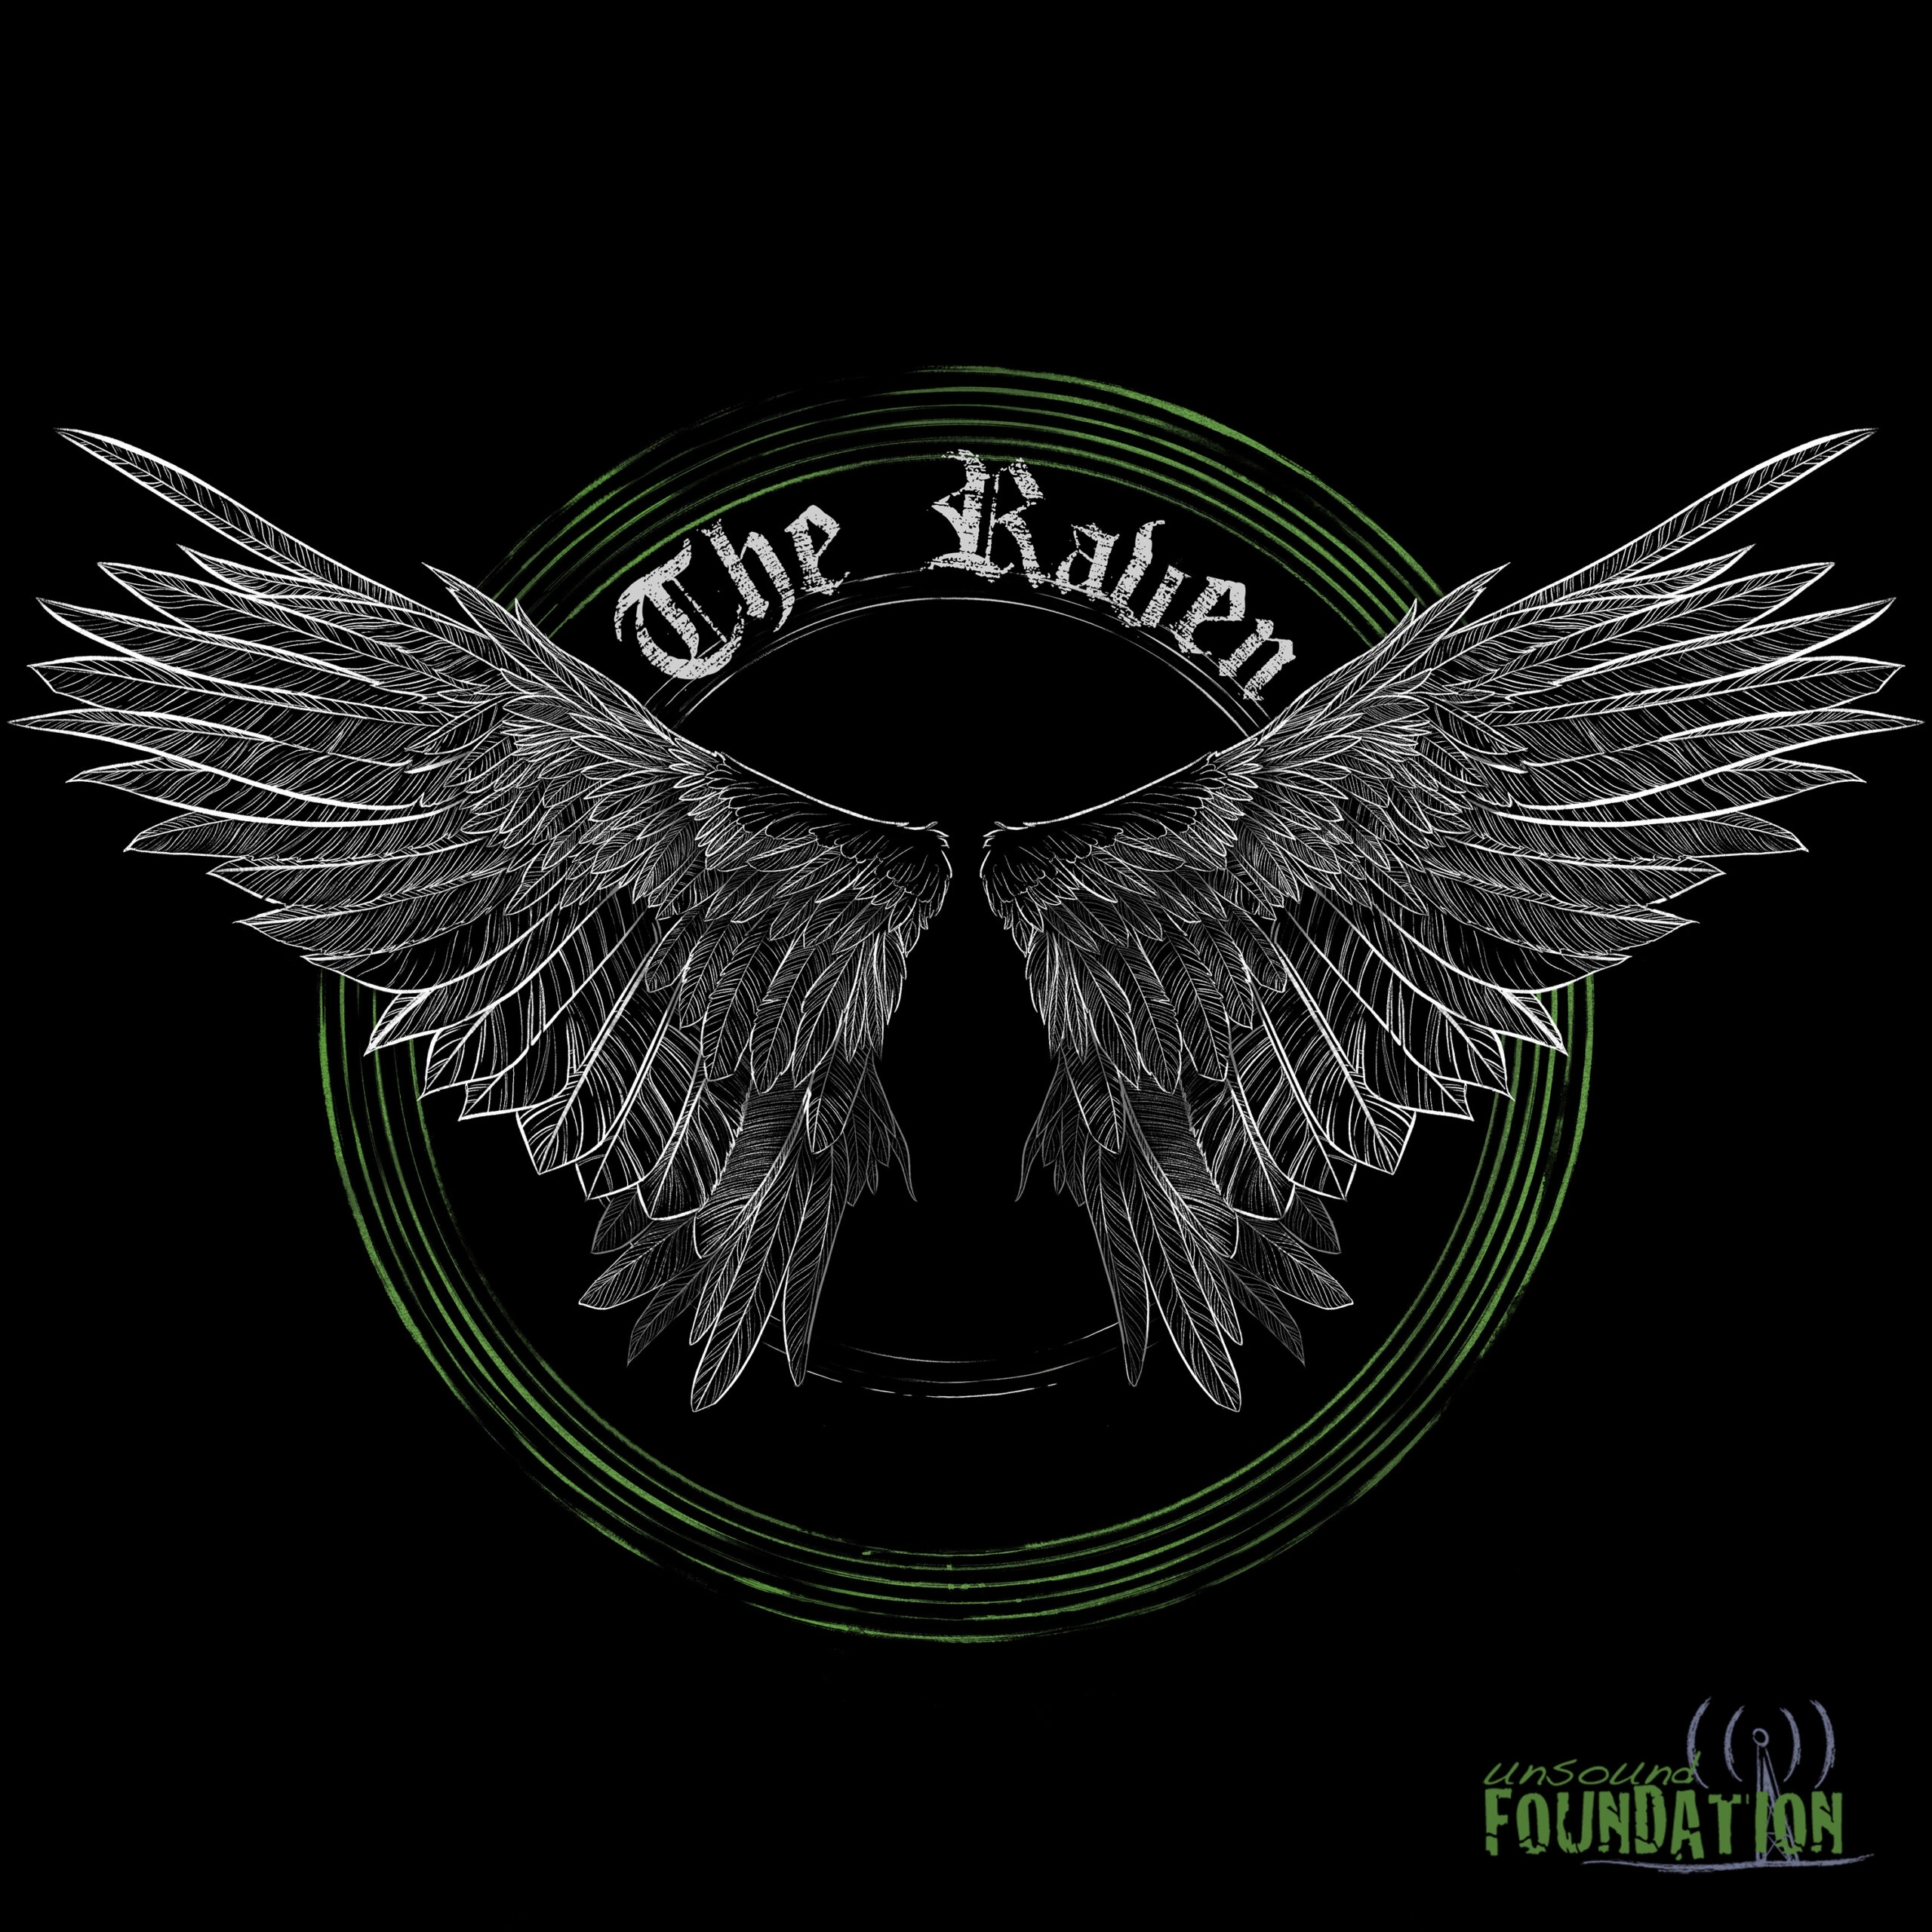 The Raven Single Cover